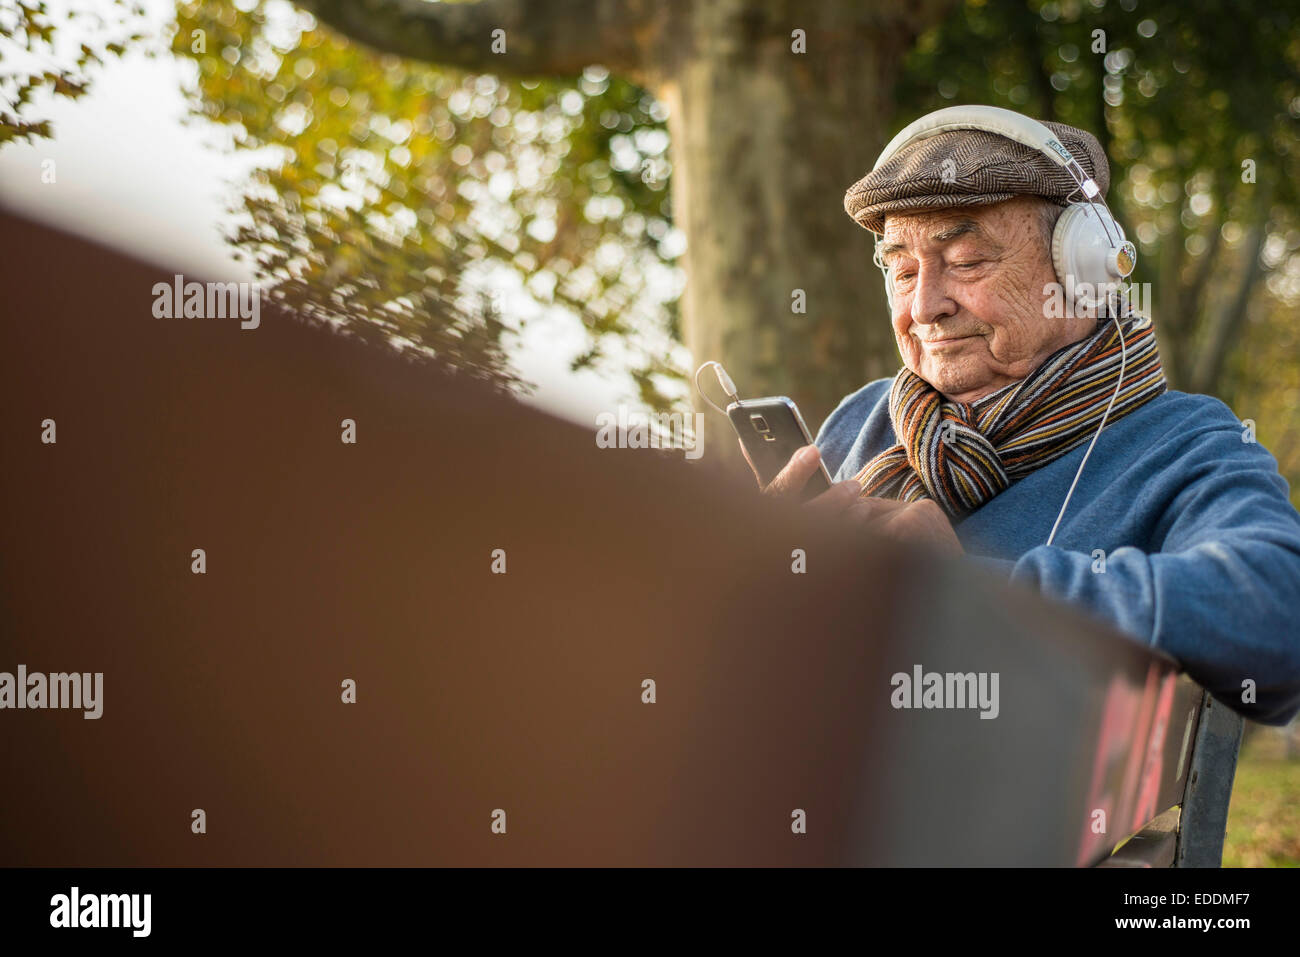 Senior man on park bench with cell phone and headphones Stock Photo